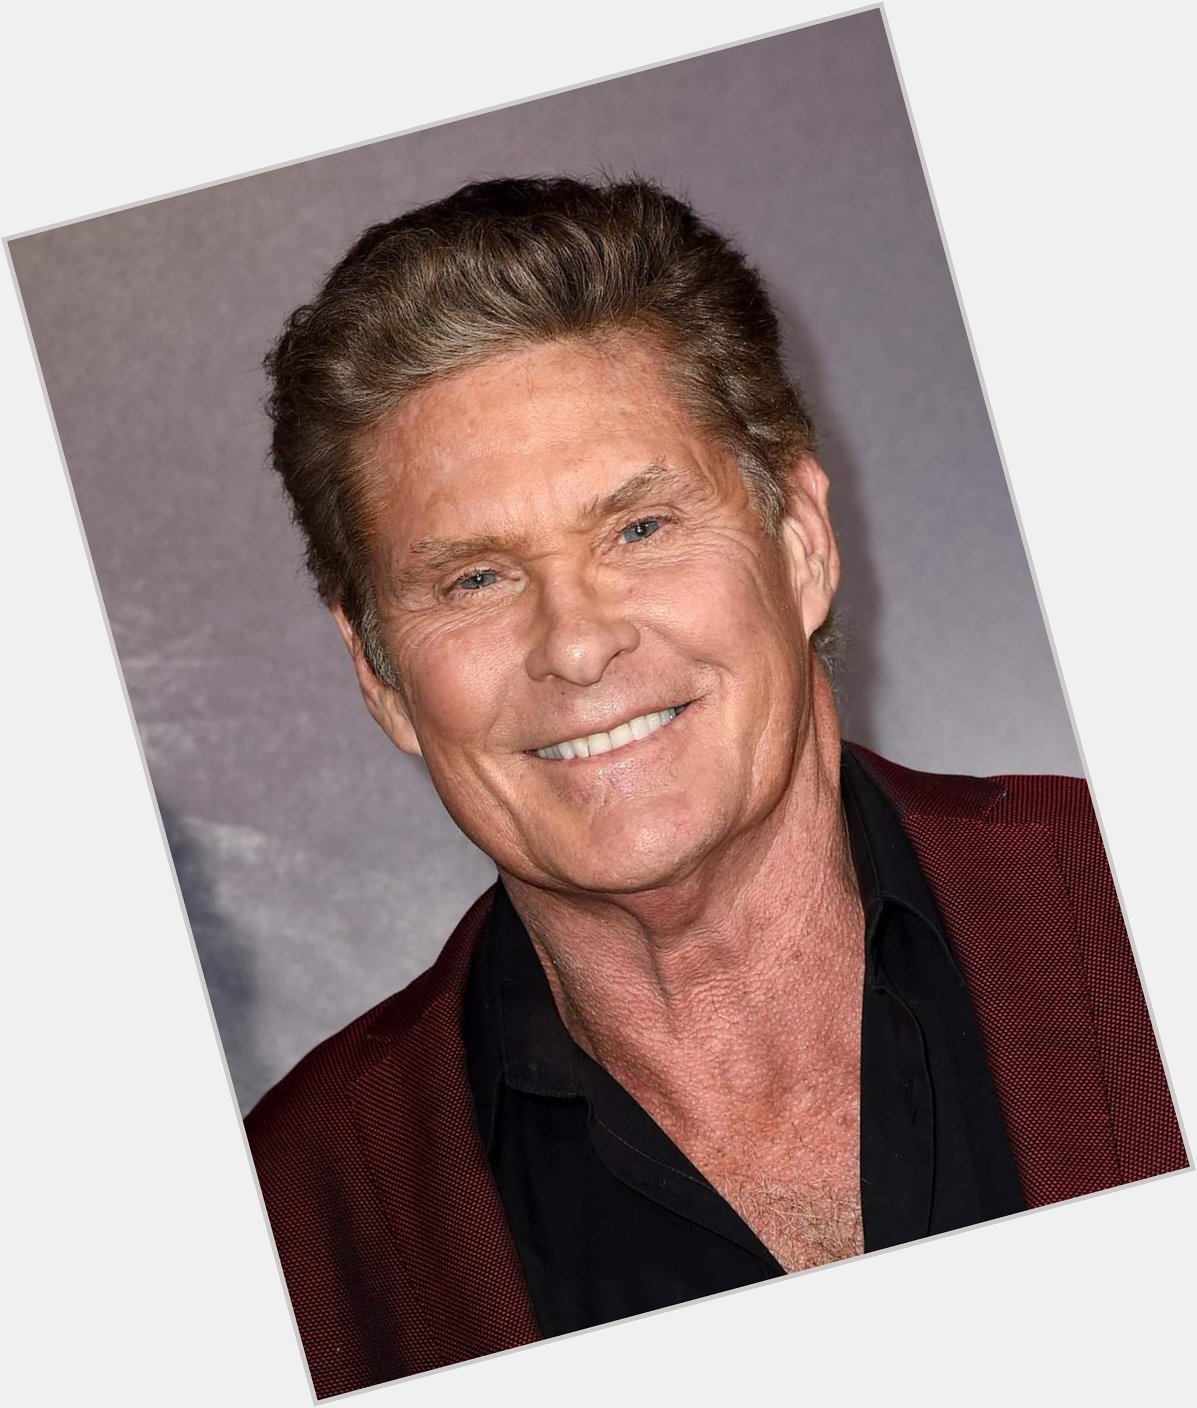 Happy Birthday David Hasselhoff.  New Age 70. My best Wishes for you.  